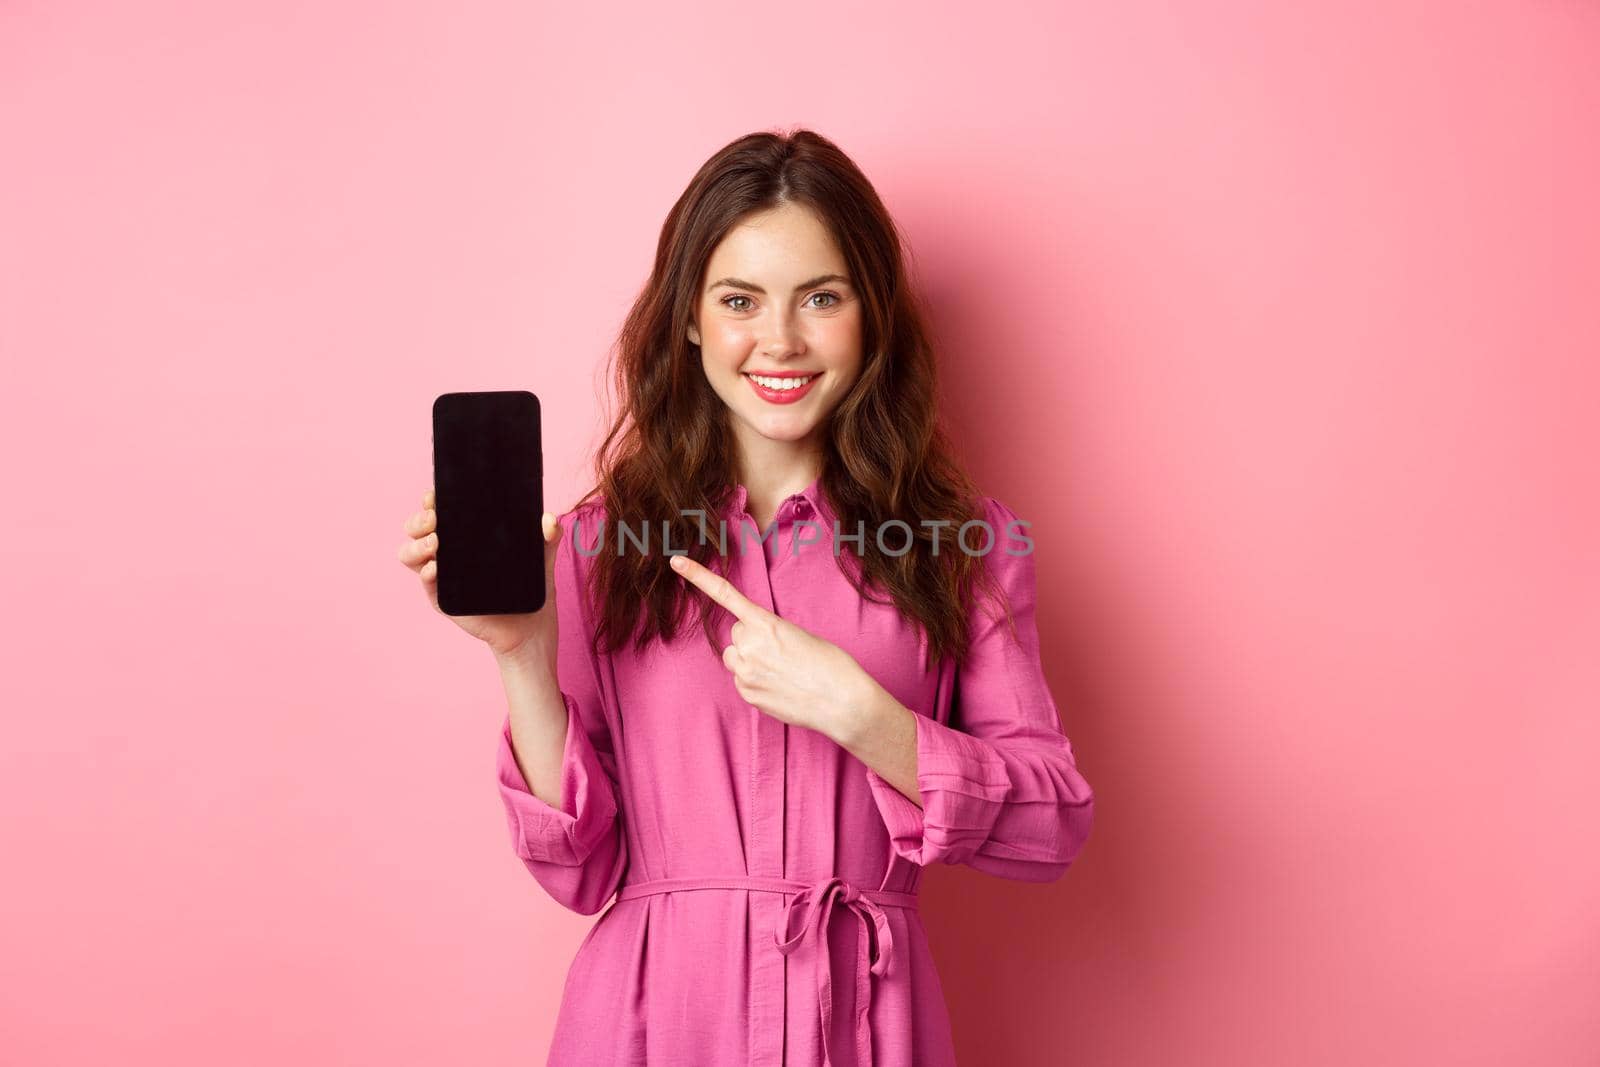 Young caucasian woman in stylish dress, pointing finger at smartphone screen and smiling, showing promo deal online, pink background.